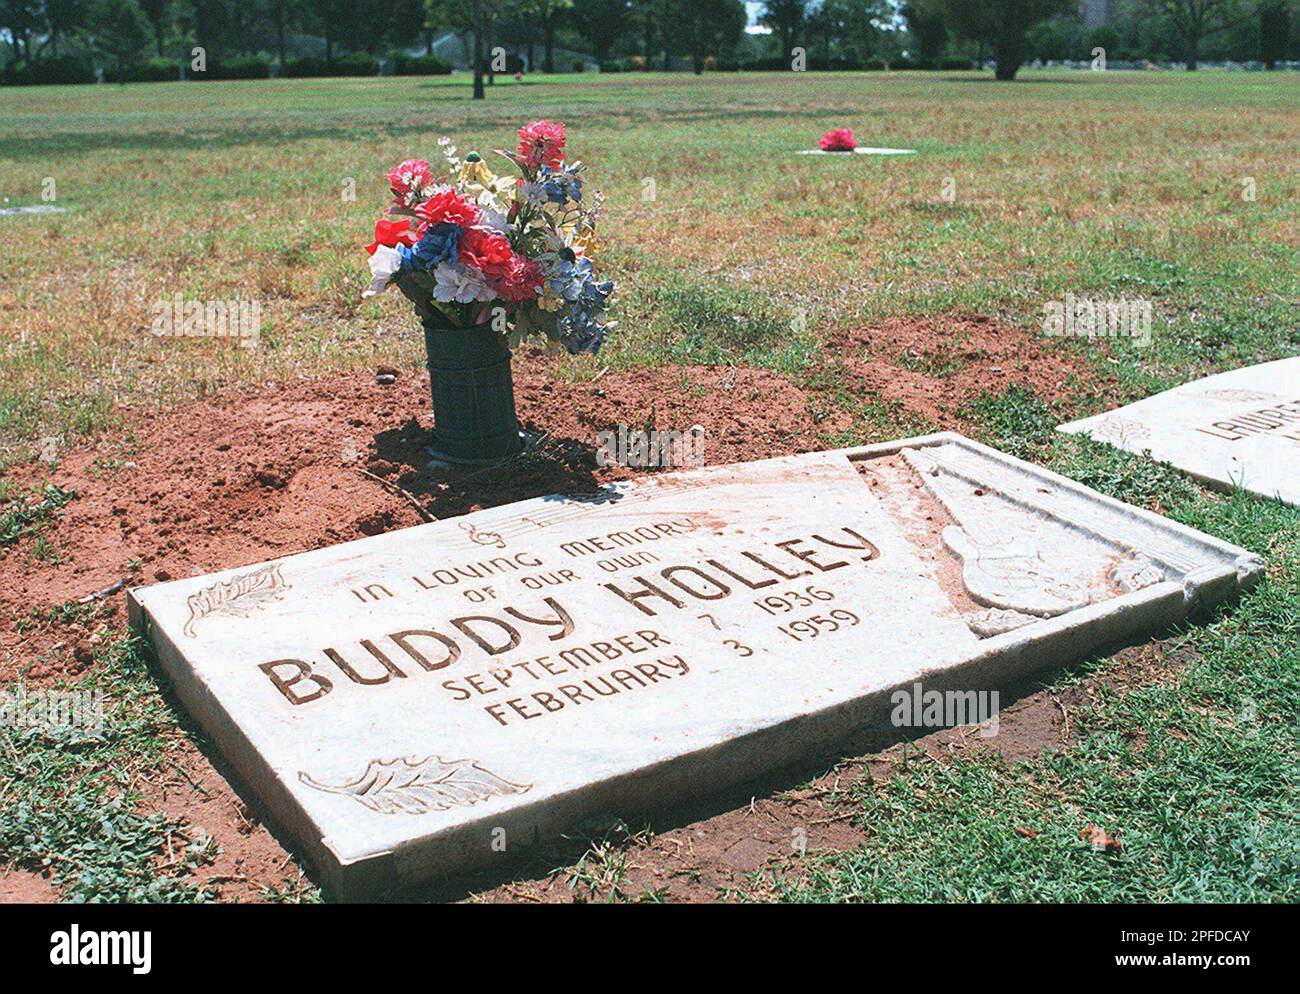 The grave of Buddy Holly is shown in the City of Lubbock Cemetery in  Lubbock, Texas on Thursday, July 28, 1998. The rock 'n' roll singer was  killed in a plane crash